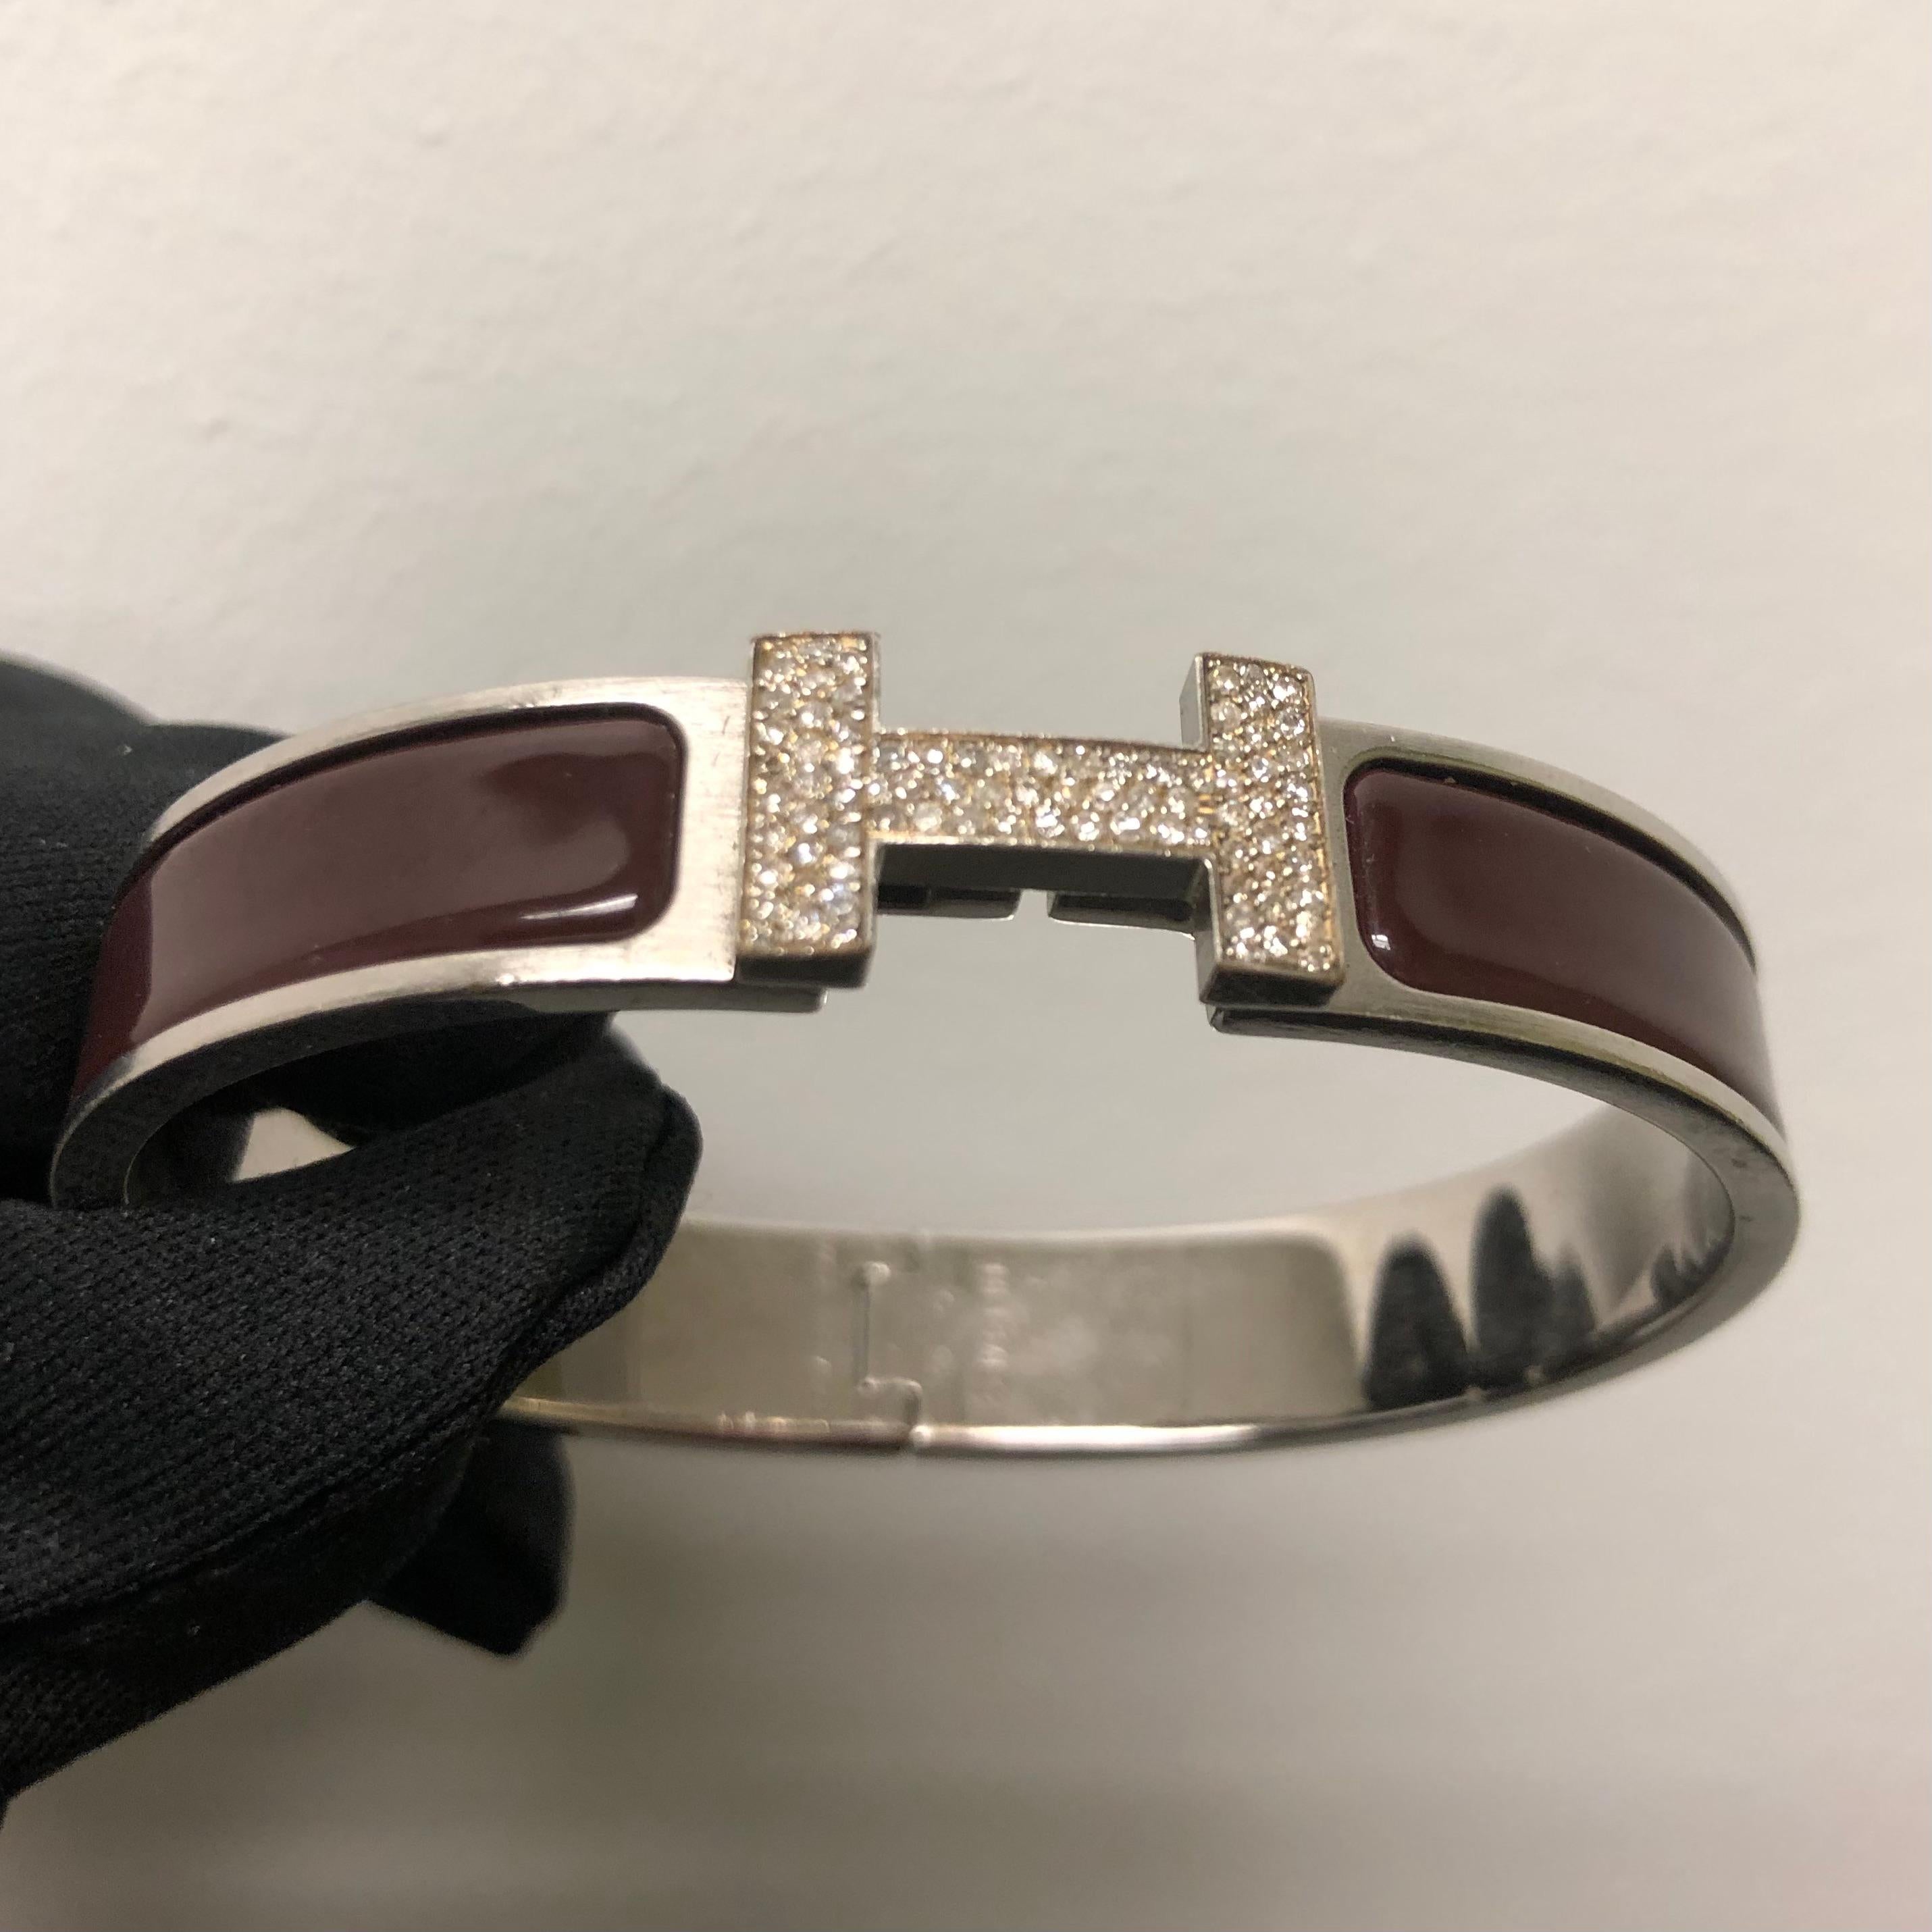 Custom Diamond Hermes Clic H Bracelet complete with original box.

An original Hermes Clic H bracelet GM size in Brown and Silver color is customized hand-set with approx. 1.25 carats of natural genuine earth-mined SI-I Diamonds. The diamonds shine